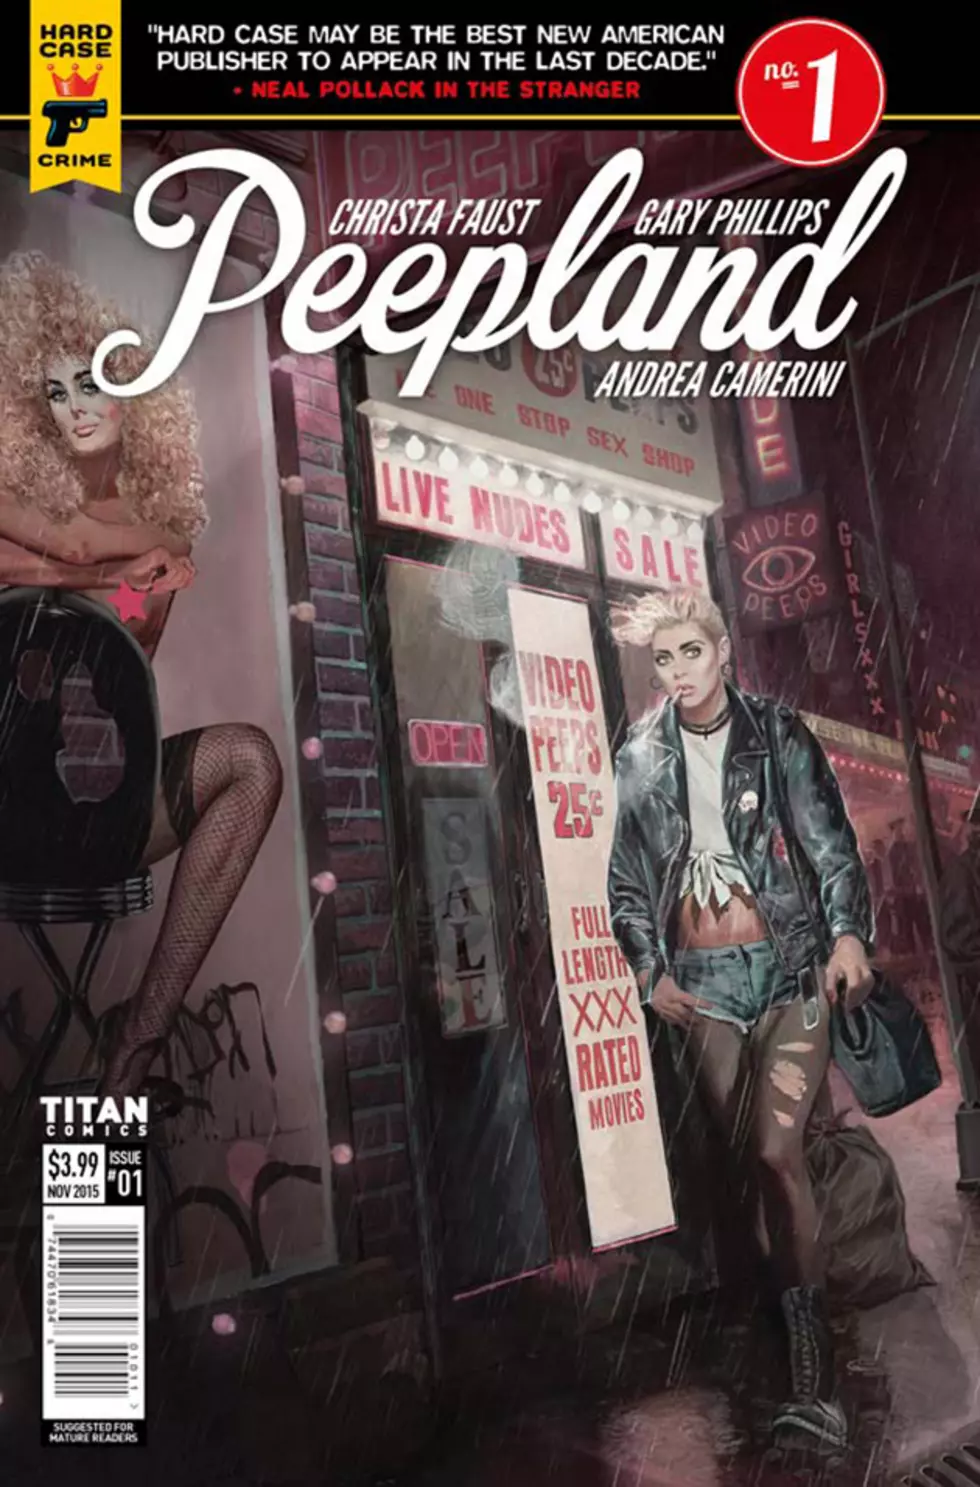 Crime Is A Sleazy Business In Faust, Phillips And Camerini&#8217;s &#8216;Peepland&#8217; #1 [Preview]